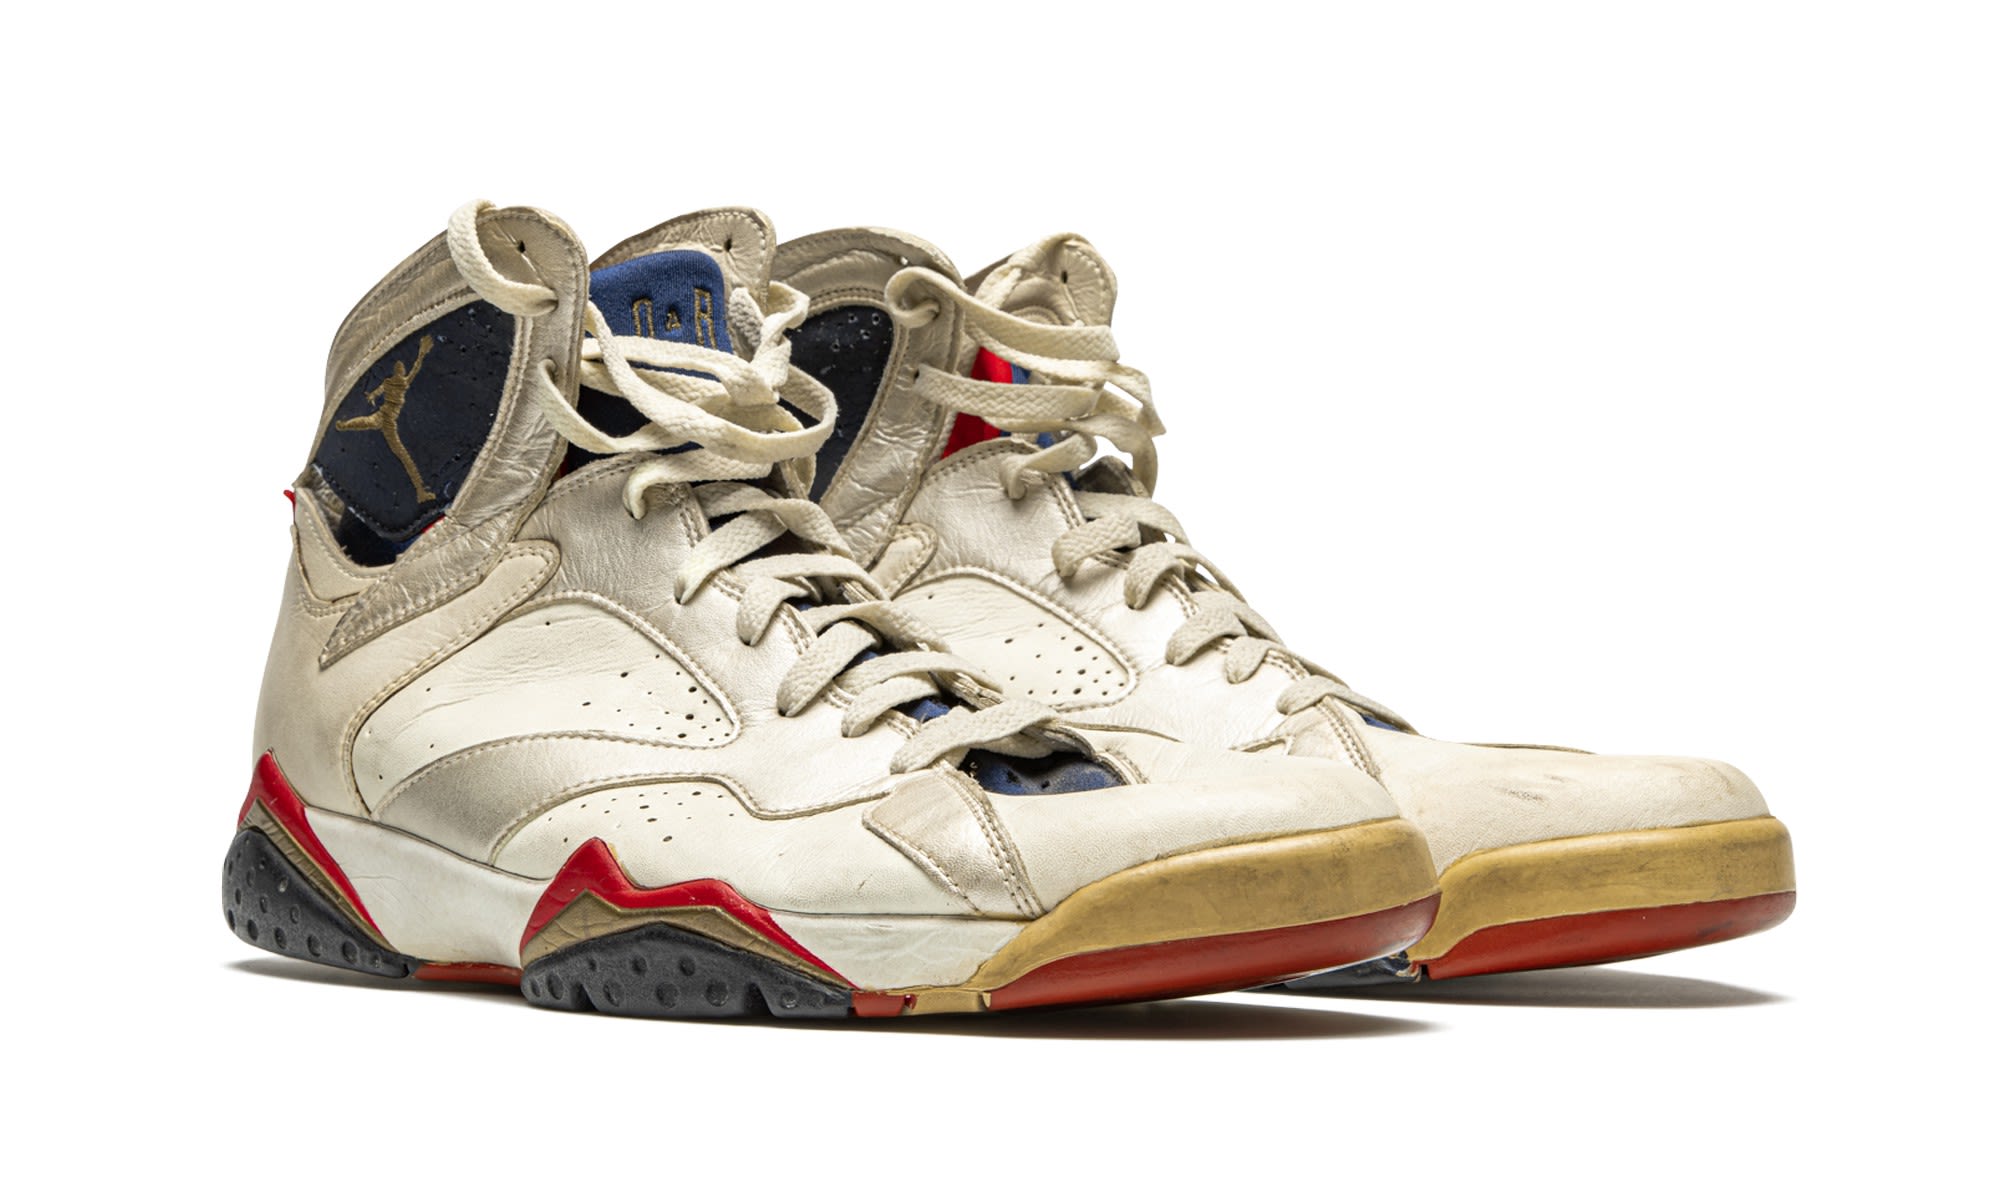 Jordan, Magic, Pippen game-worn Dream Team shoes auctioned for